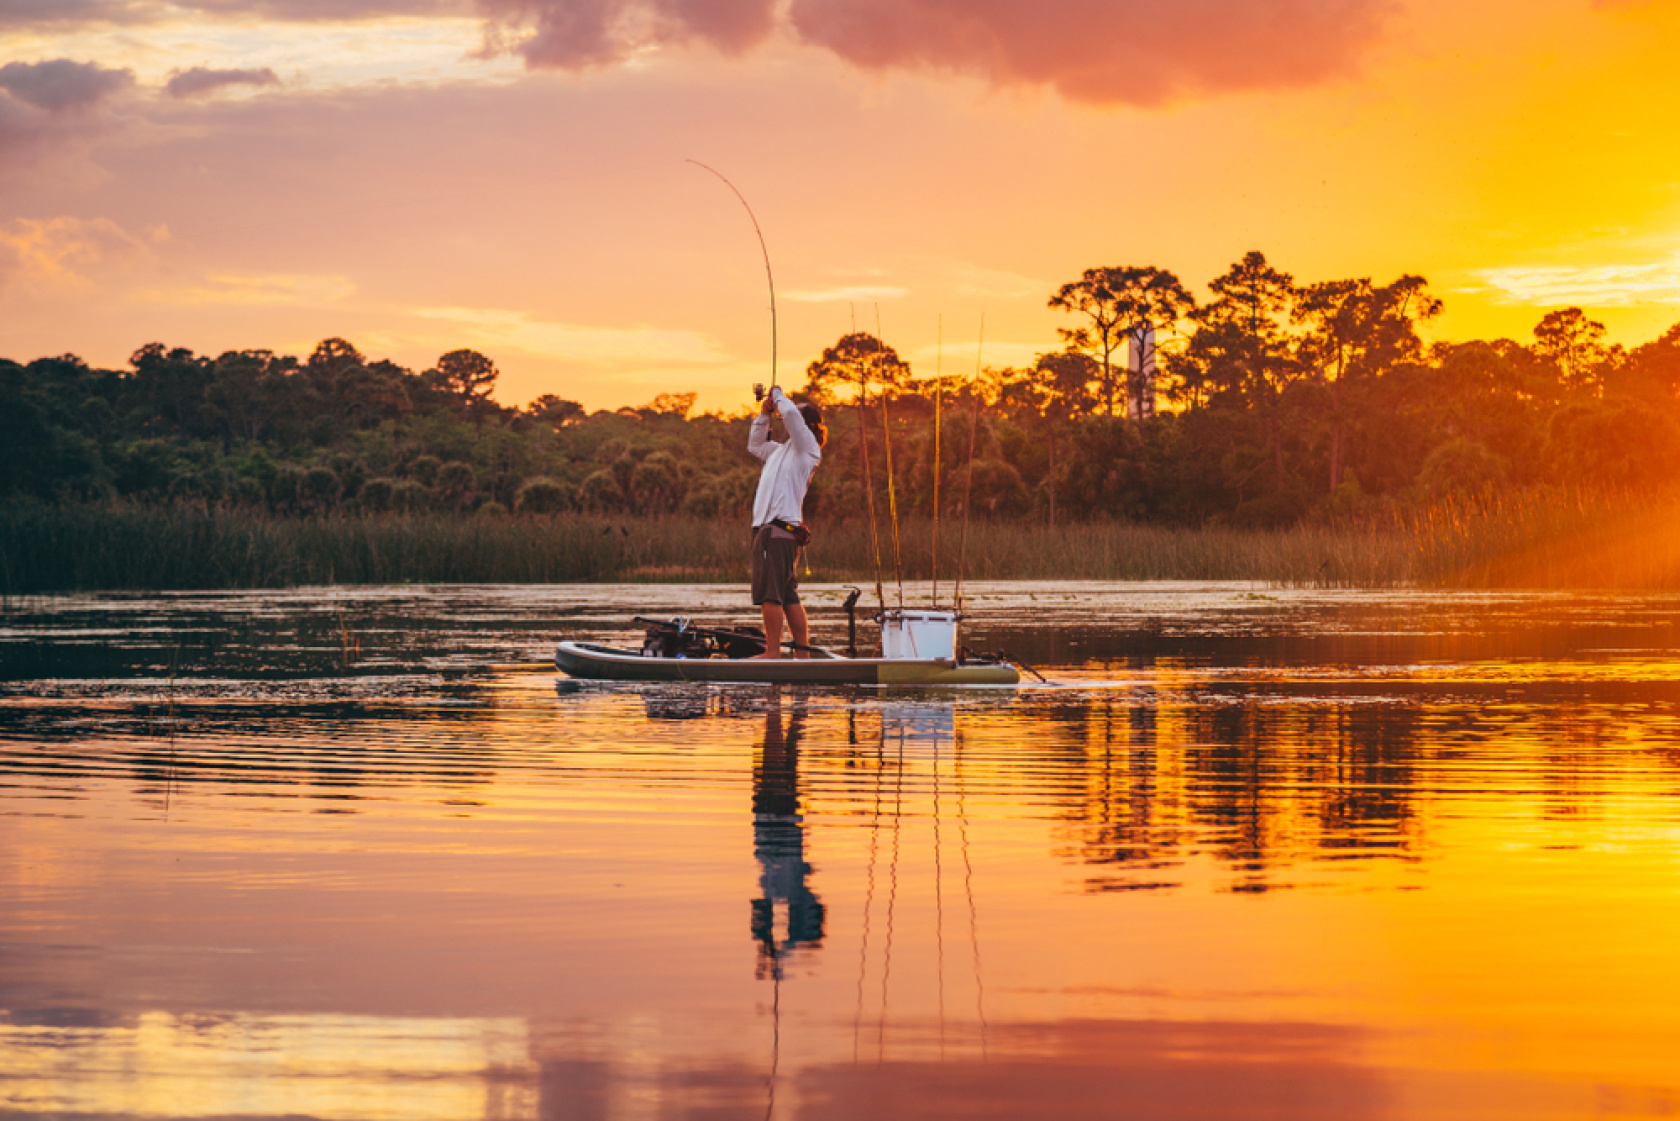 Here are the top 10 bass fishing apps.